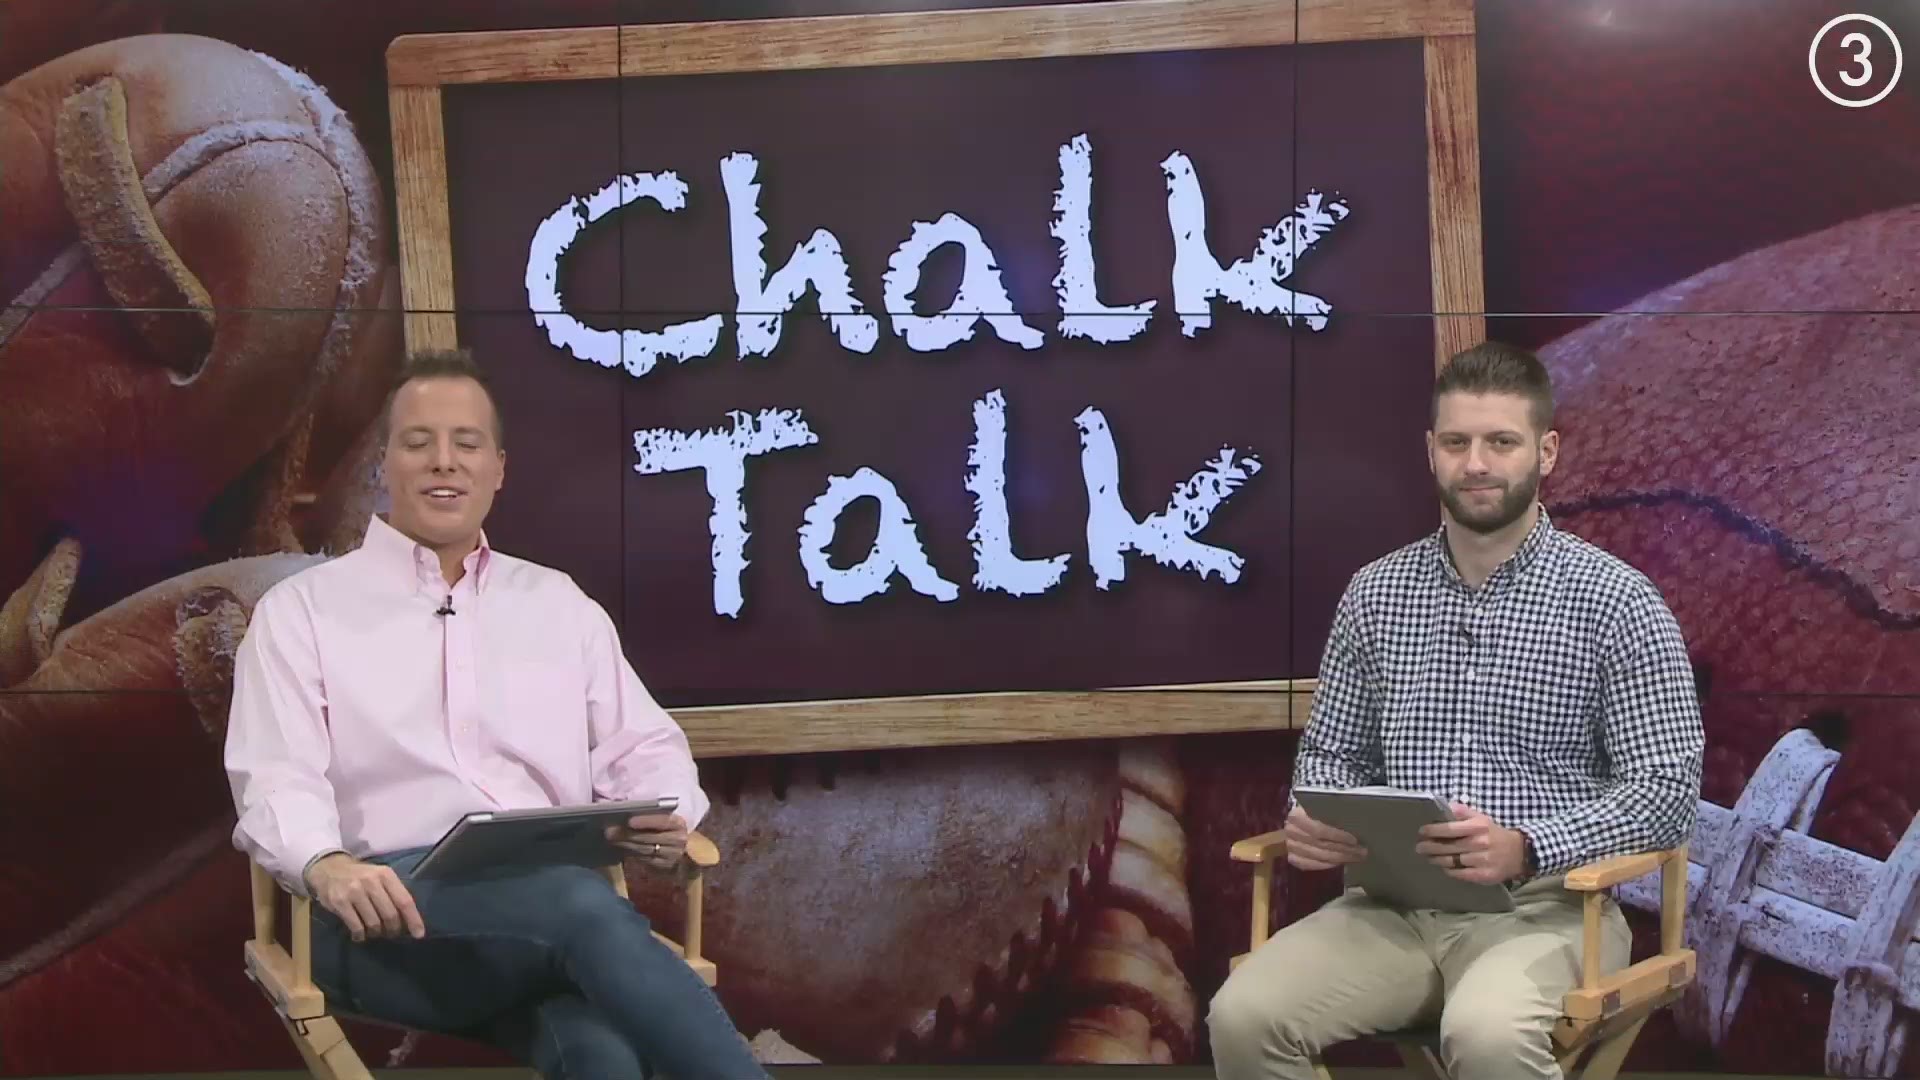 On the fifth episode of WKYC's Chalk Talk, Nick Camino and Ben Axelrod discuss and make their picks for Week 6 of the college football season and Week 5 of the NFL.